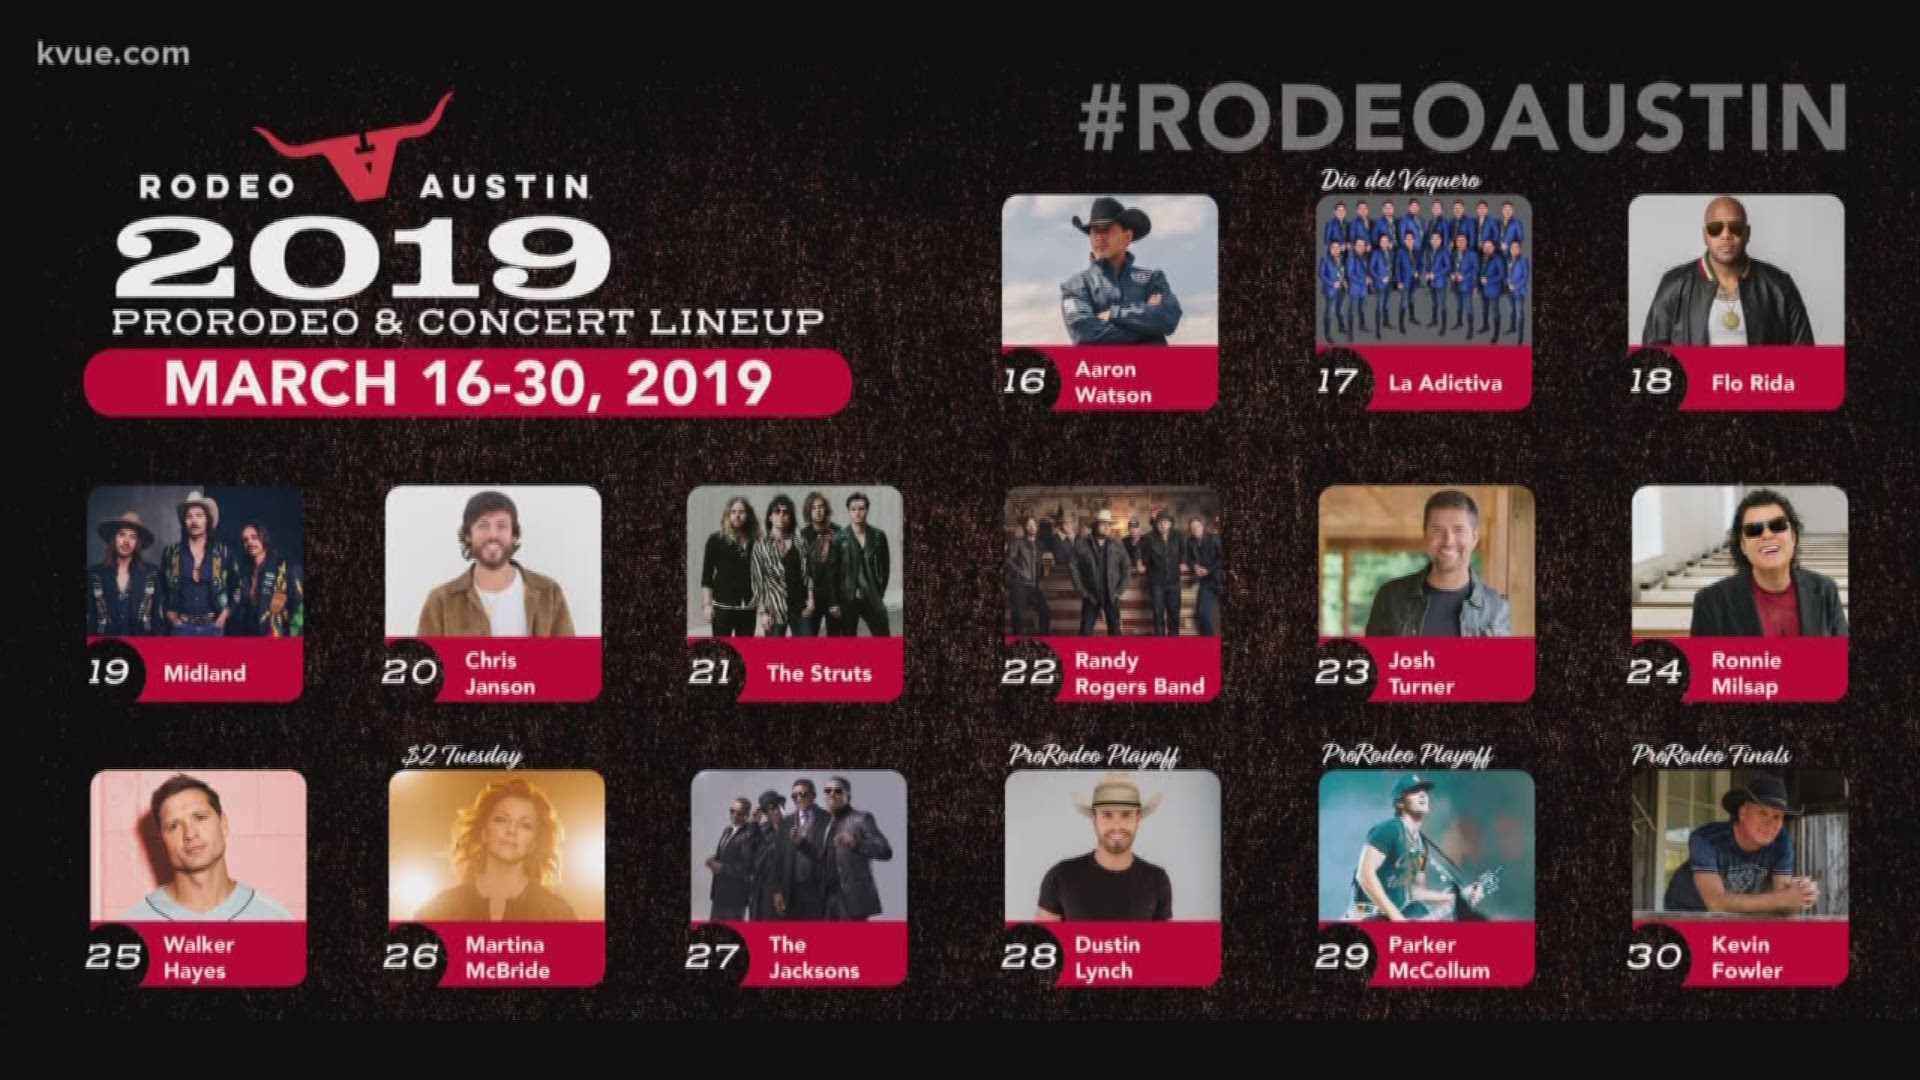 The music lineupe for Rodeo Austin, which is coming up in March, is finally out.